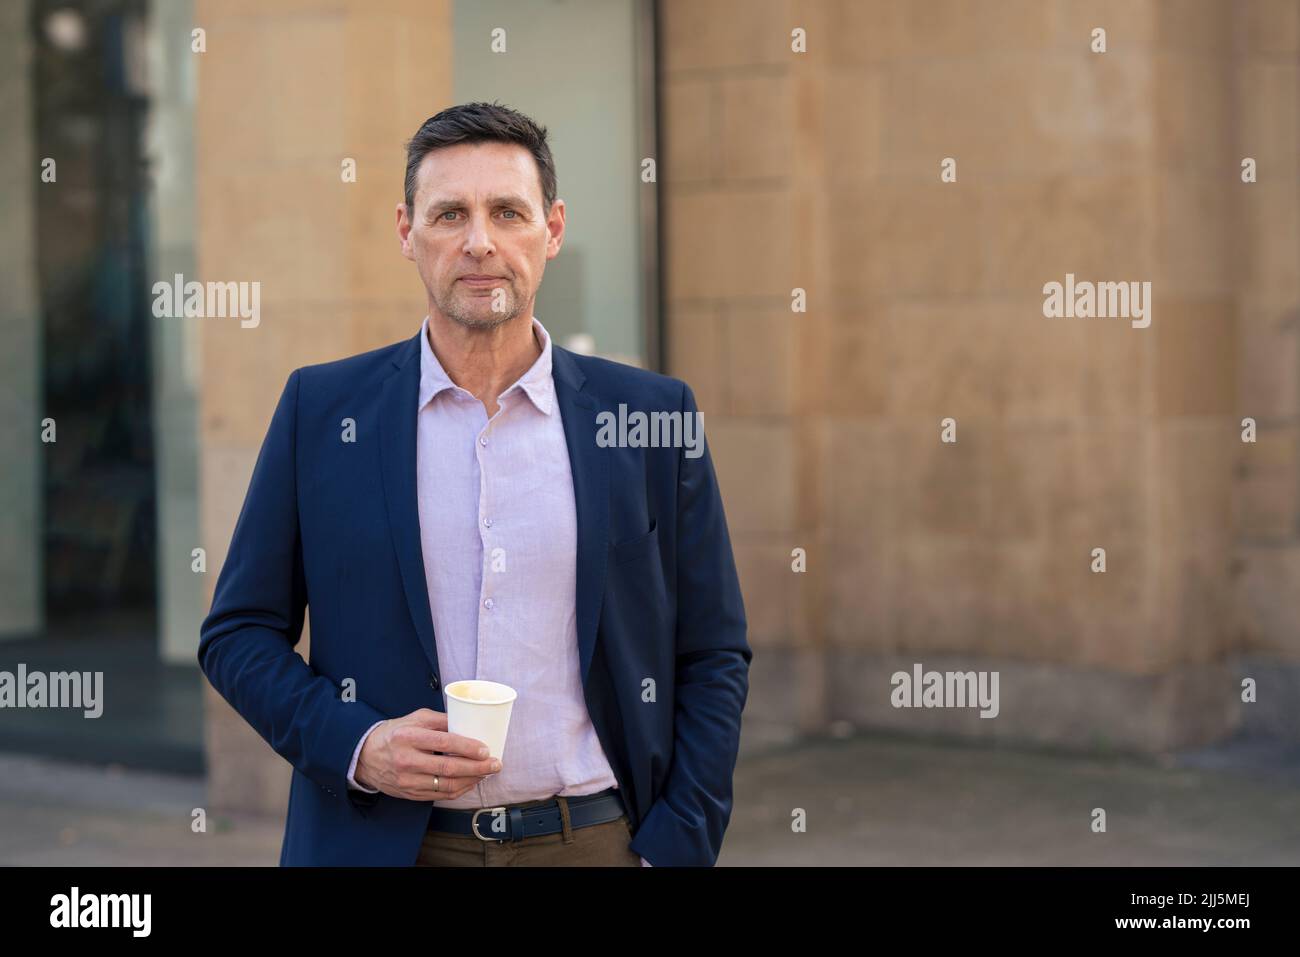 Confident businessman holding disposable cup Stock Photo